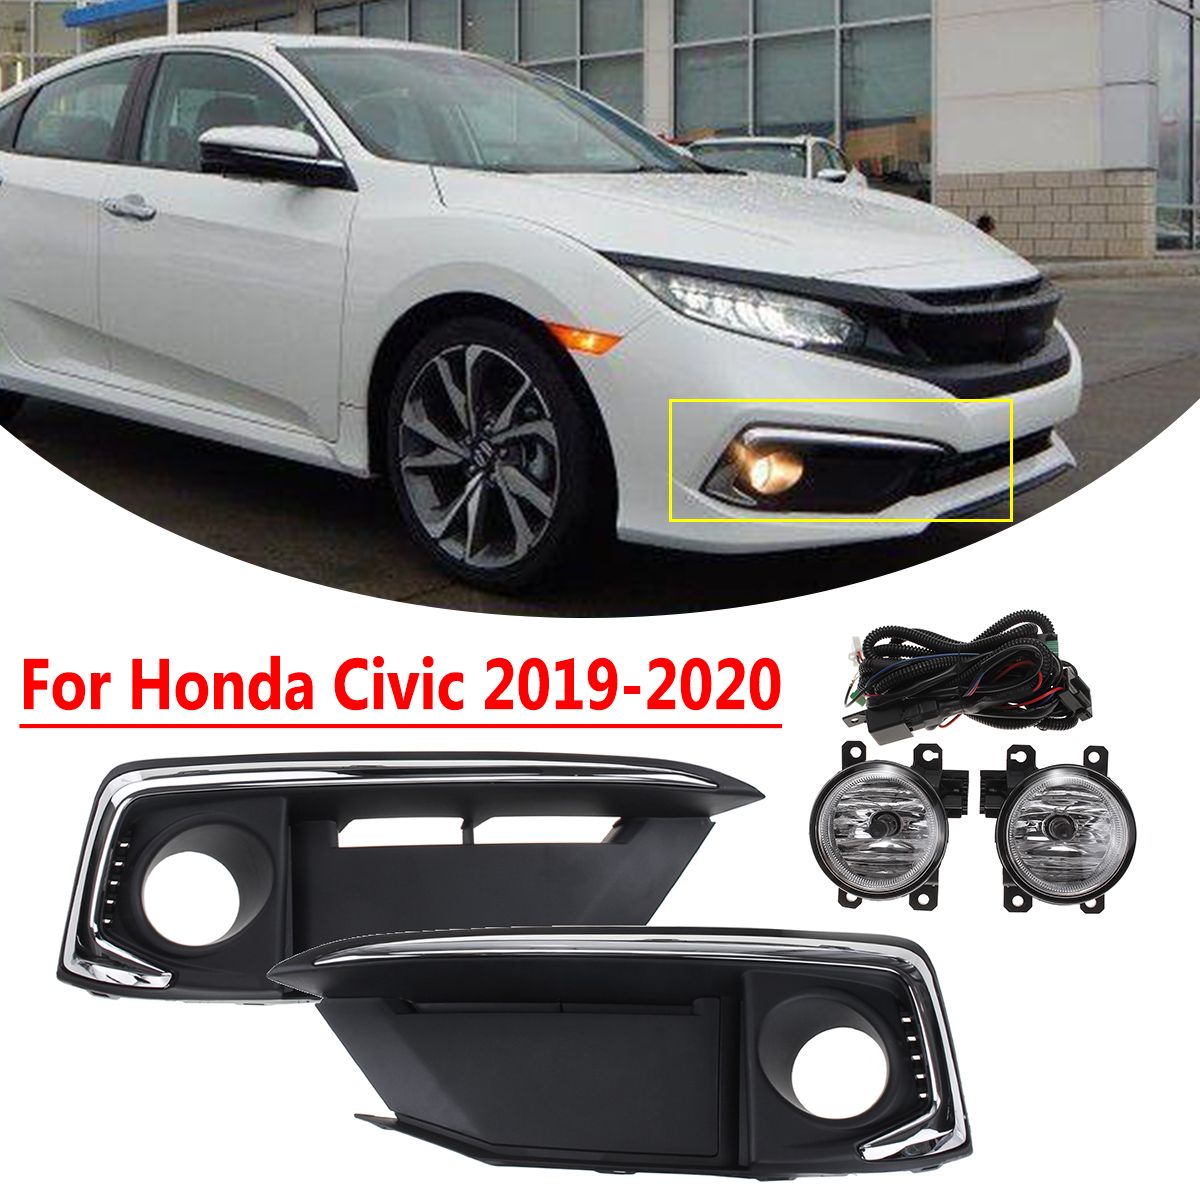 Car-Front-Bumper-Fog-Lights-Lamp-Set-with-Wiring-Switch-Relay-for-Honda-Civic-2019-2020-1598466